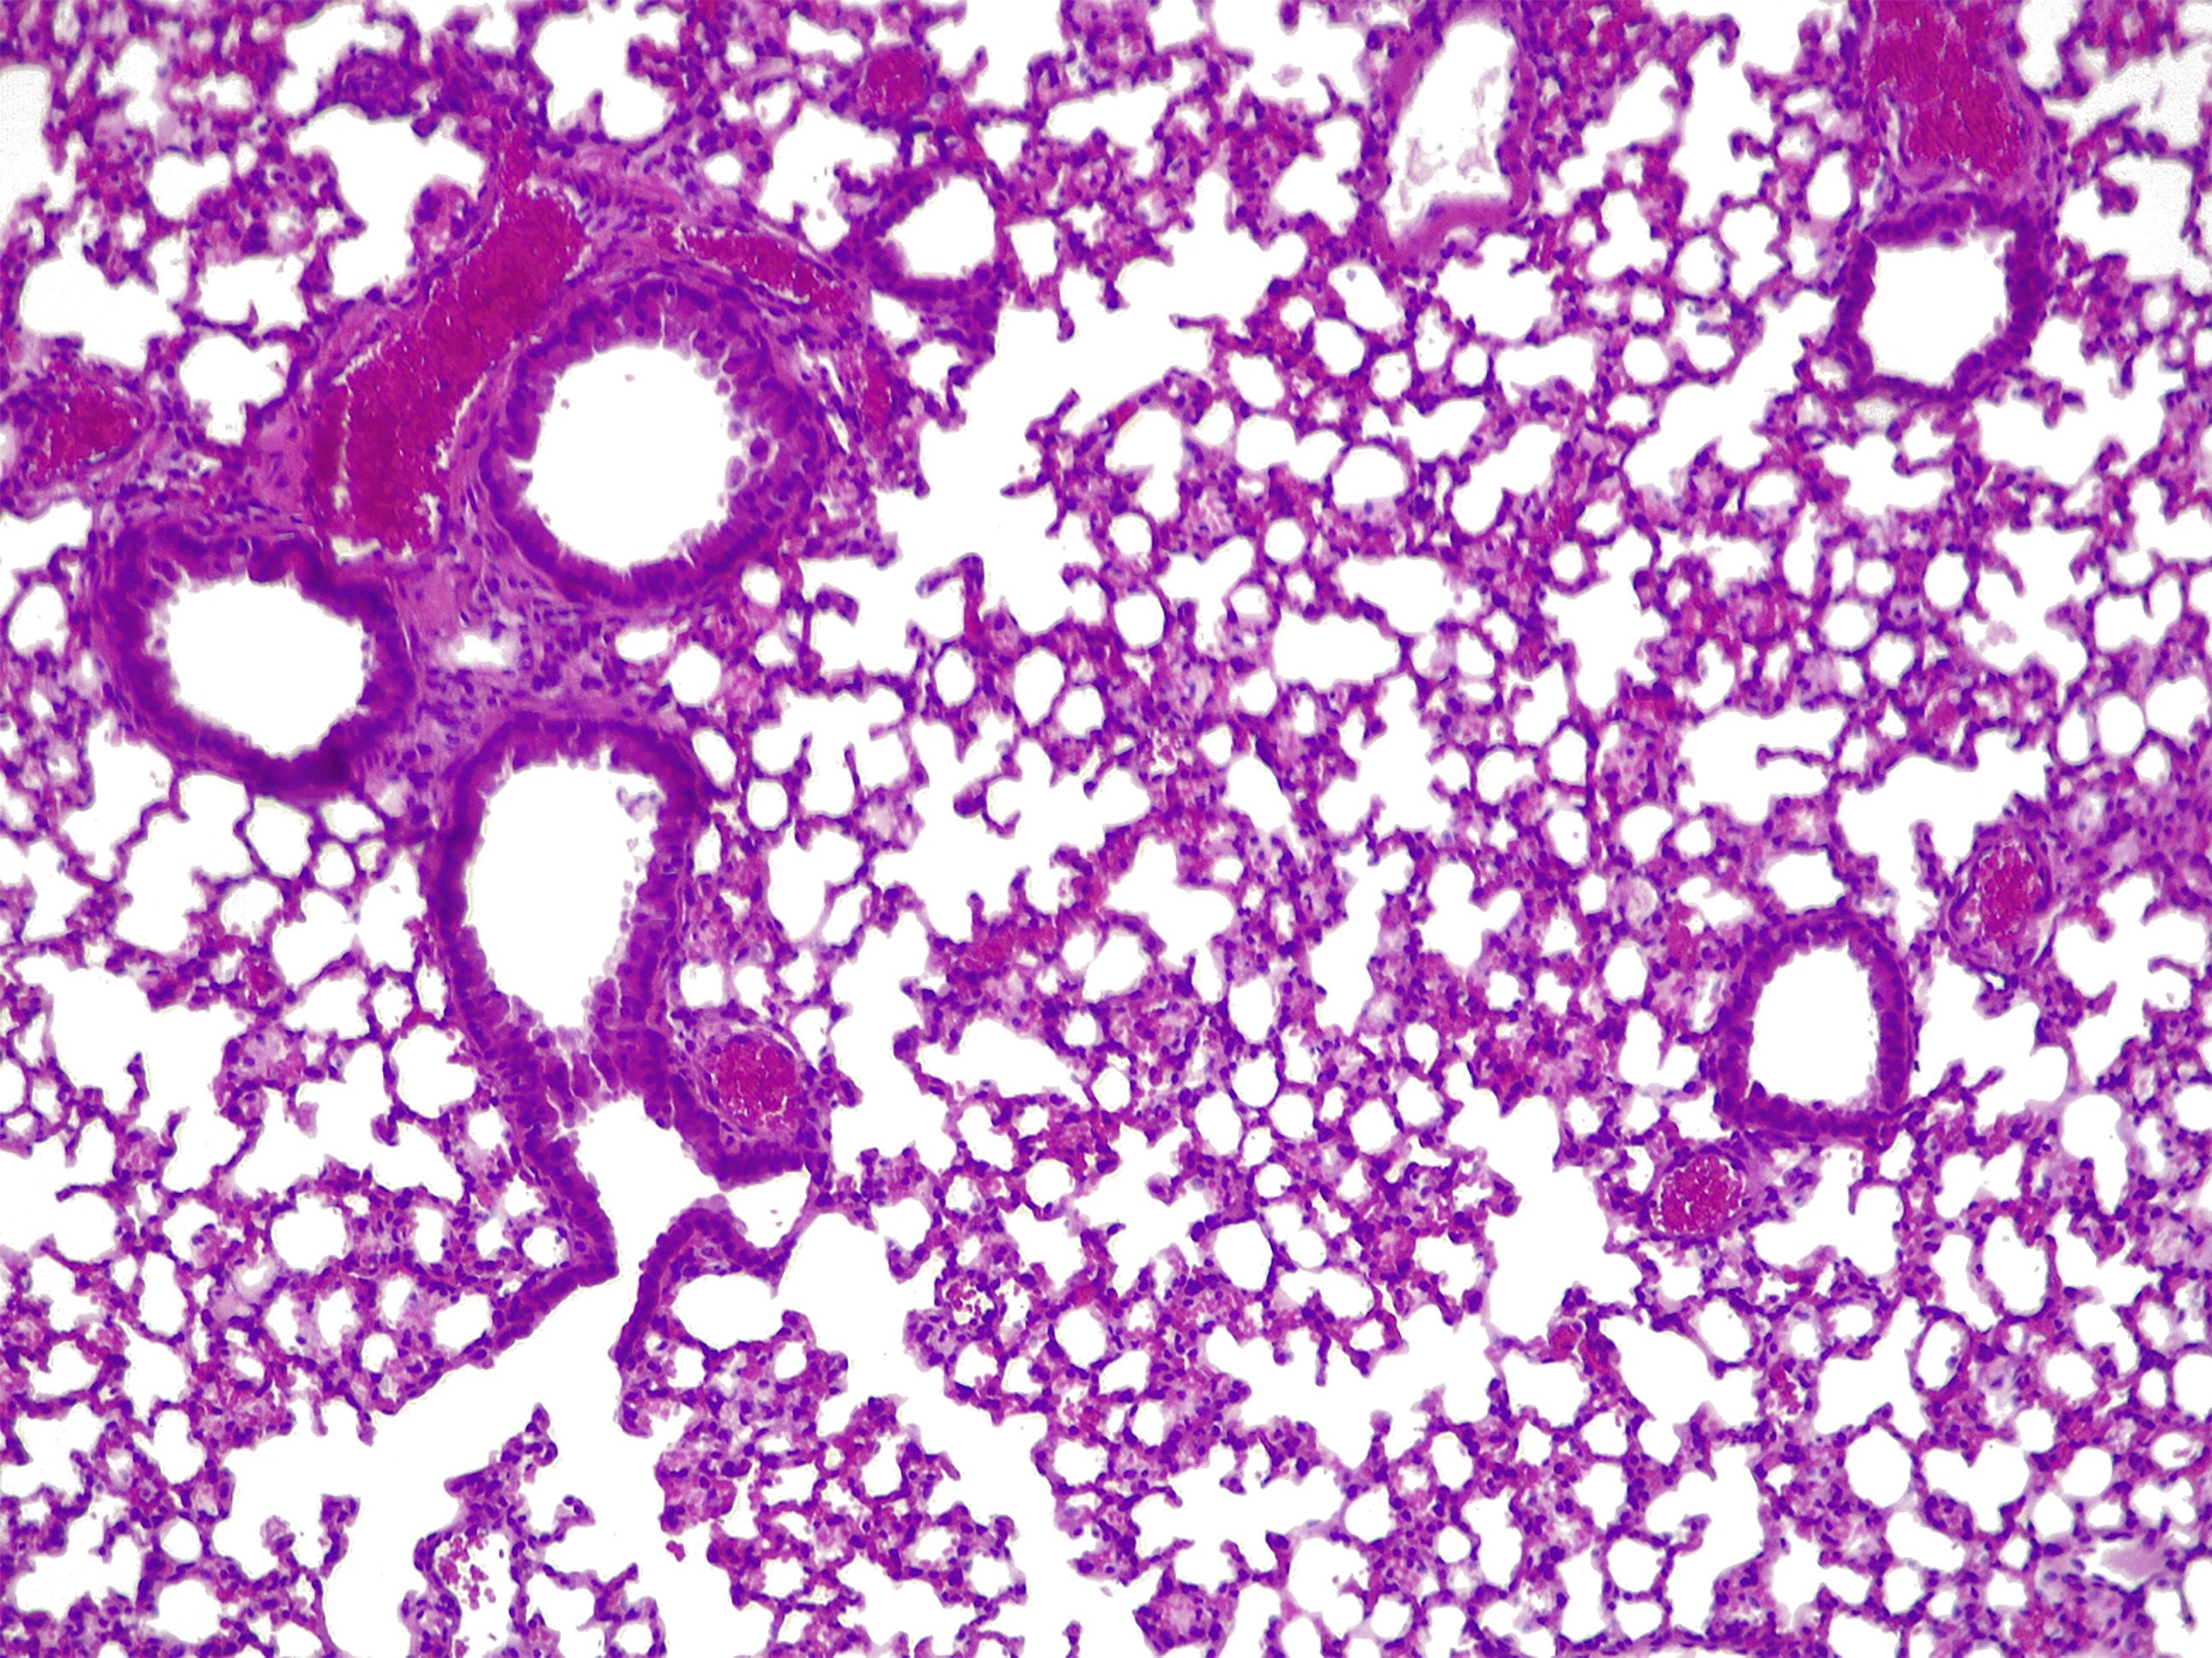 a cross-section of a mouse lung infected with Pseudonomas aeruginosa